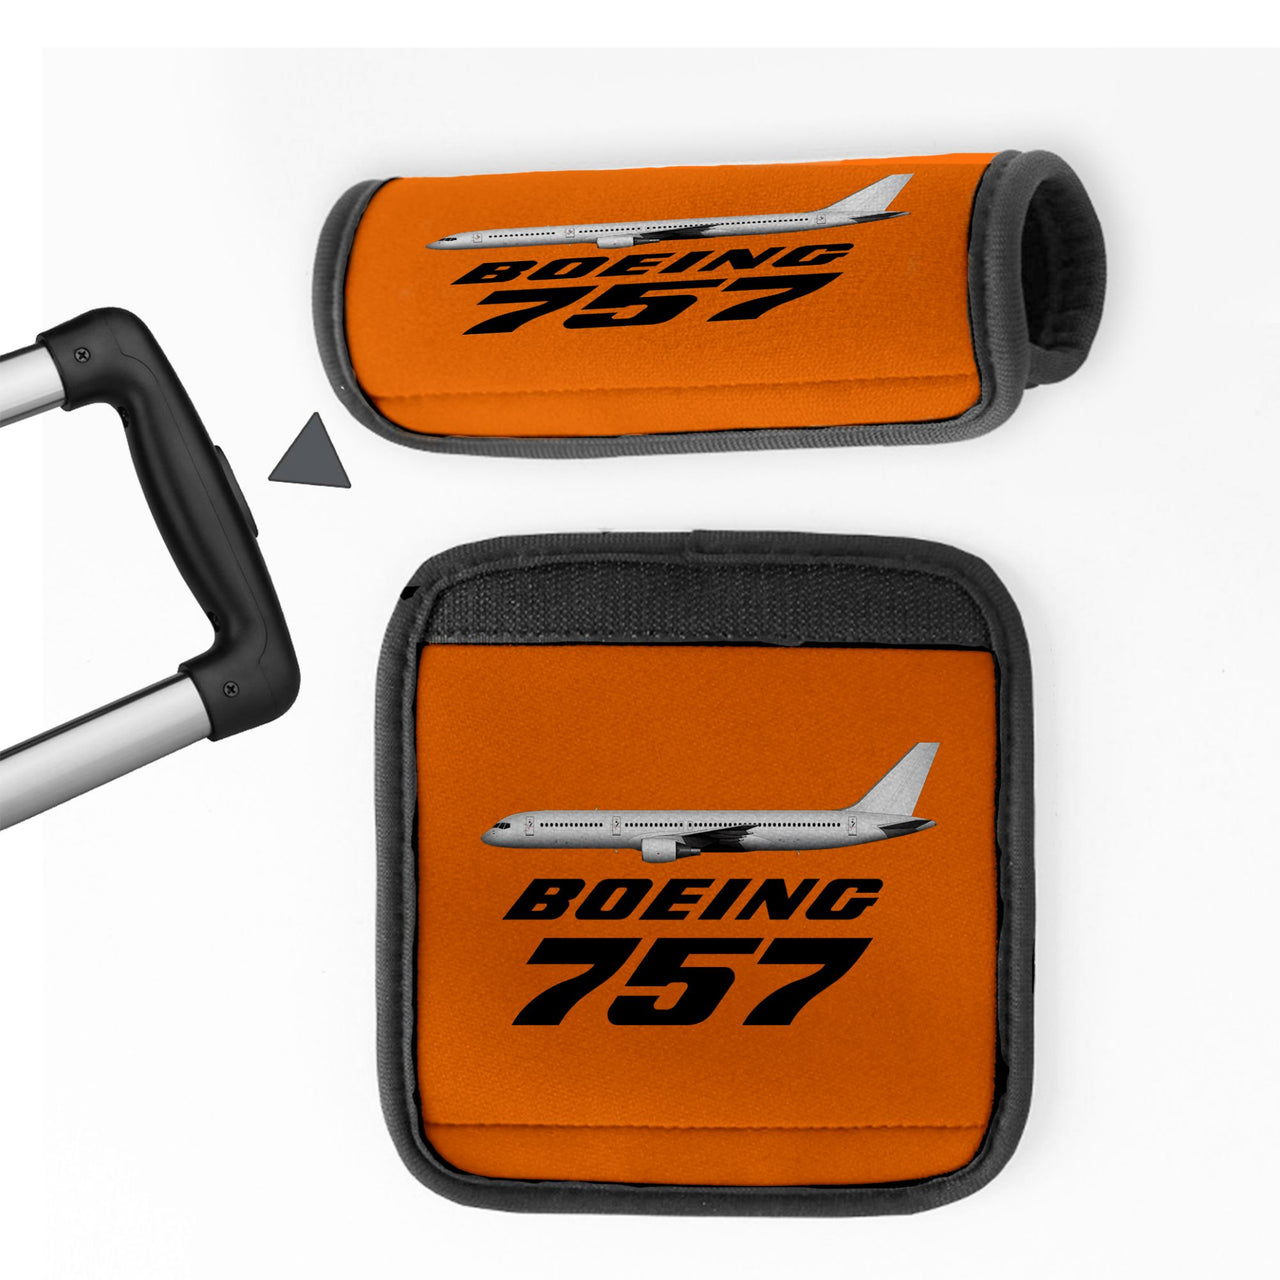 The Boeing 757 Designed Neoprene Luggage Handle Covers